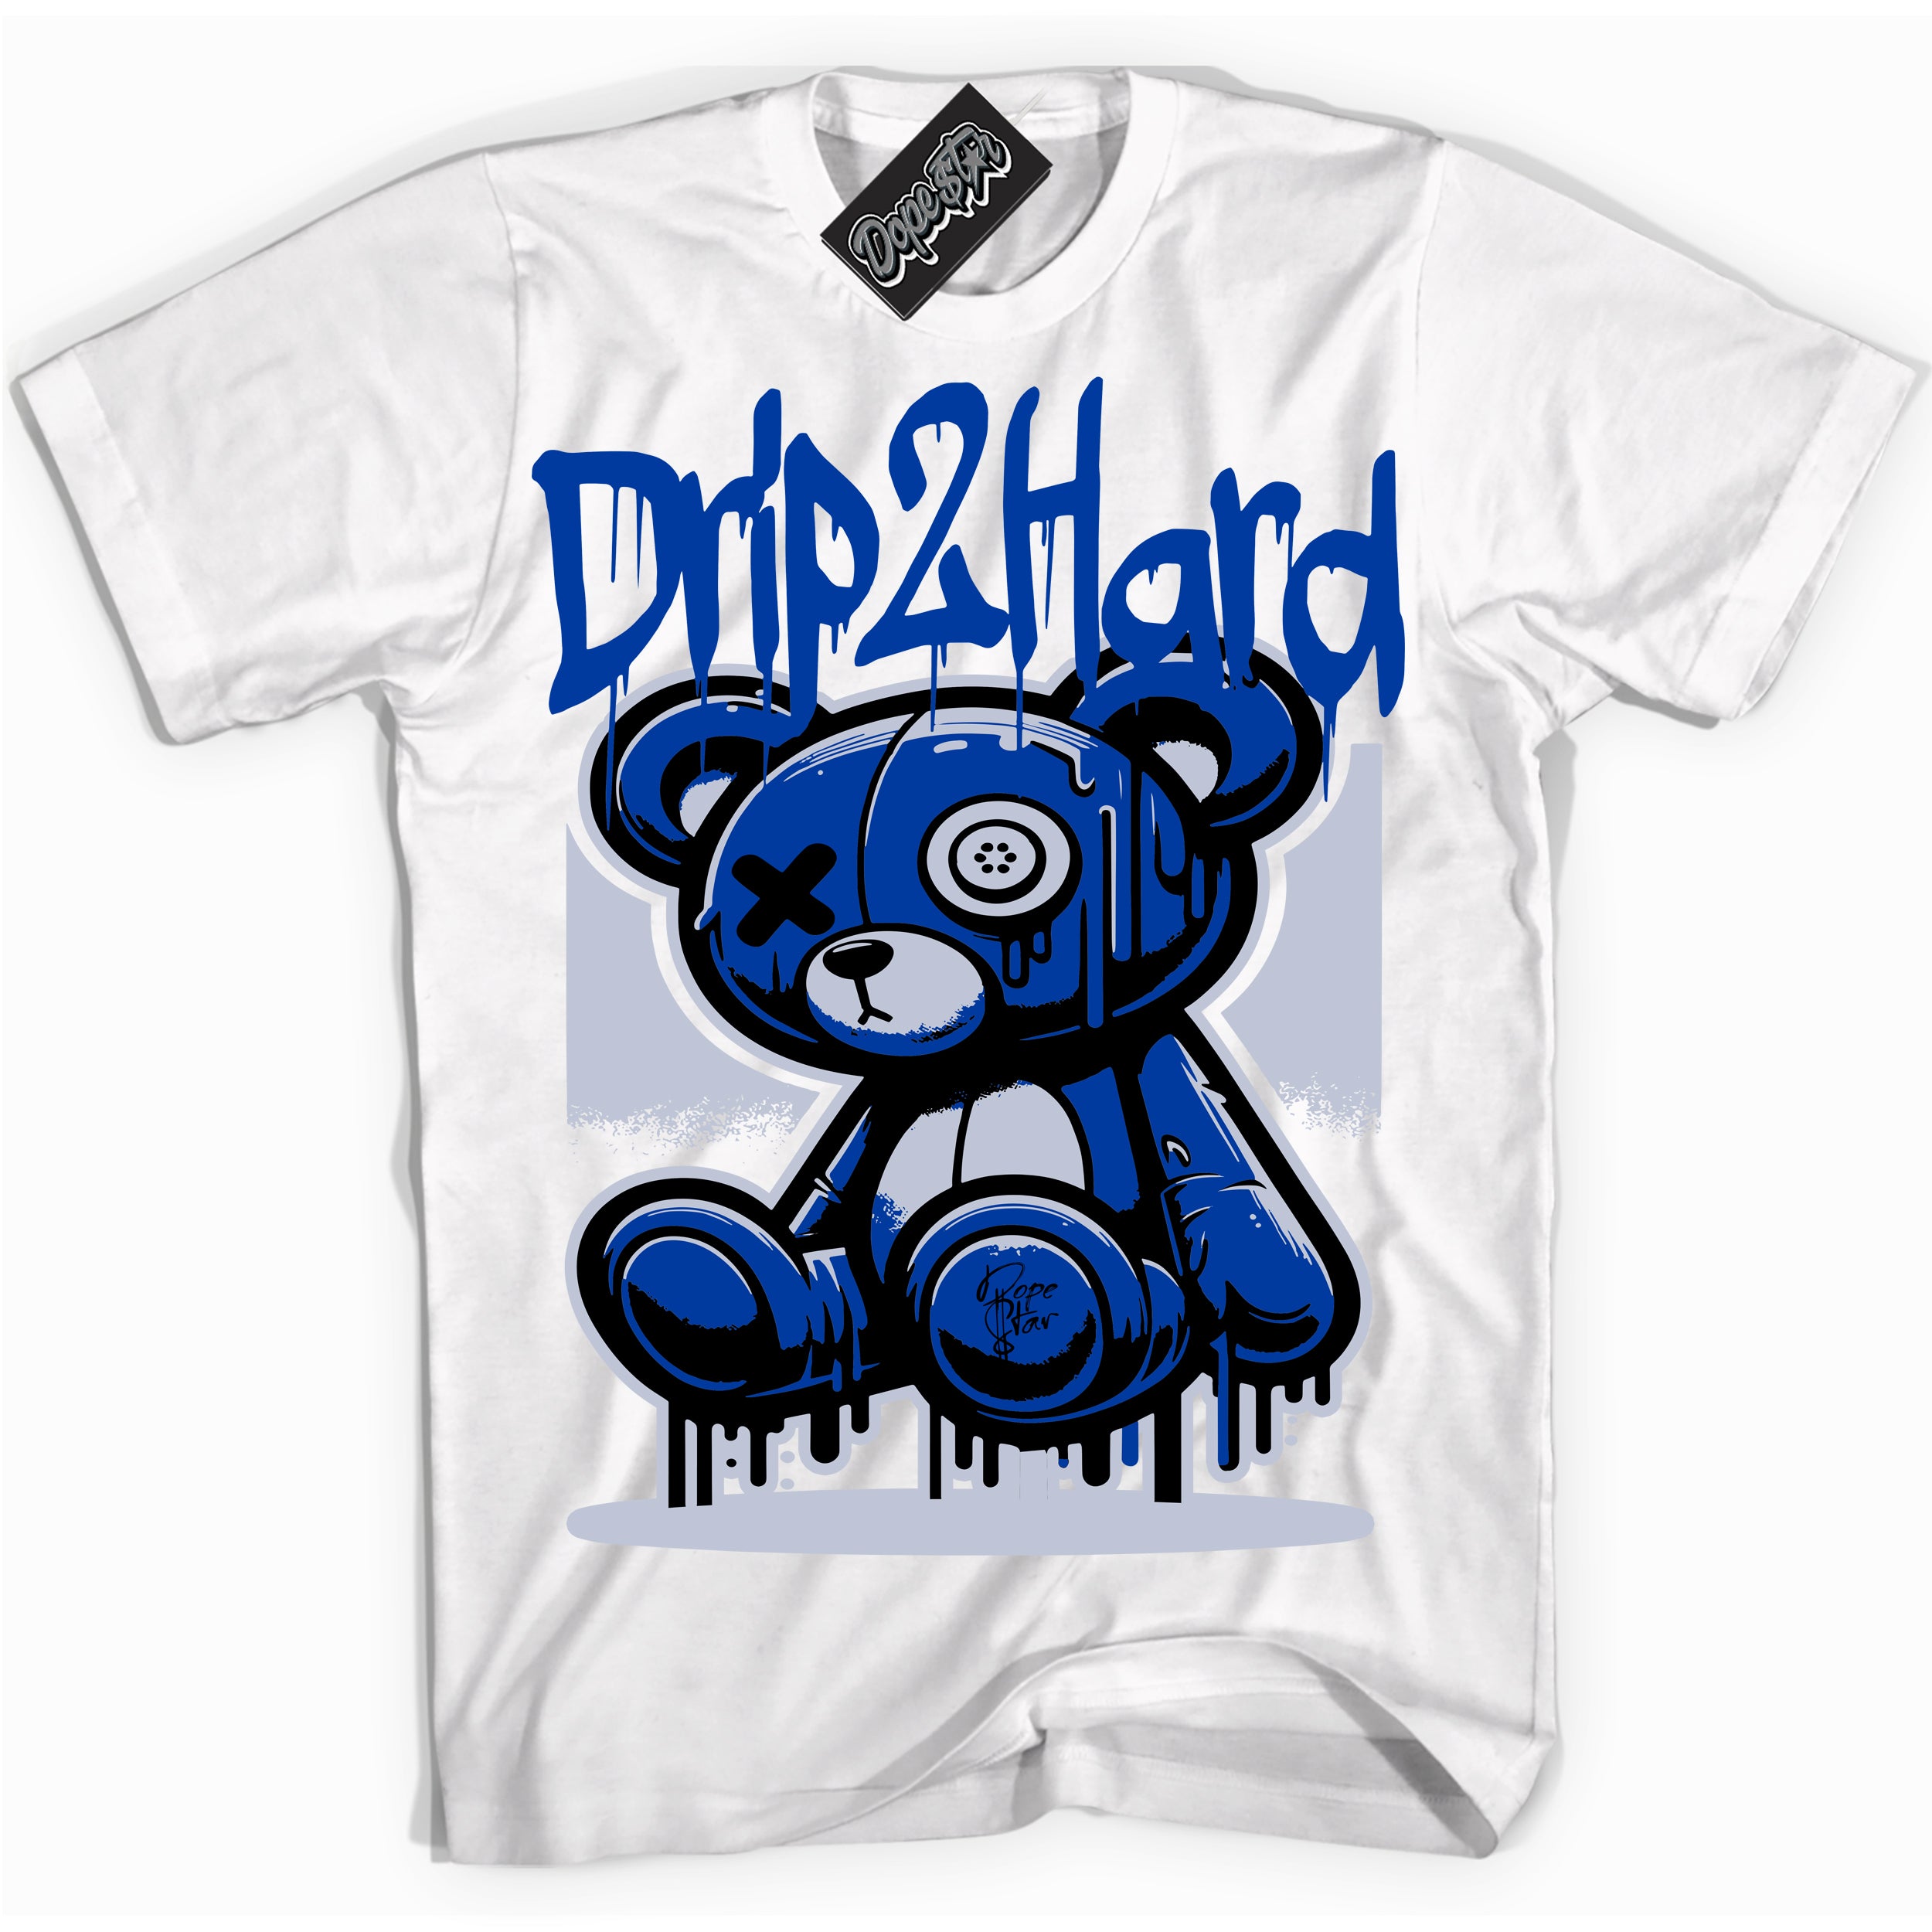 Cool White graphic tee with “ Drip 2 Hard ” design, that perfectly matches Race Blue 5s